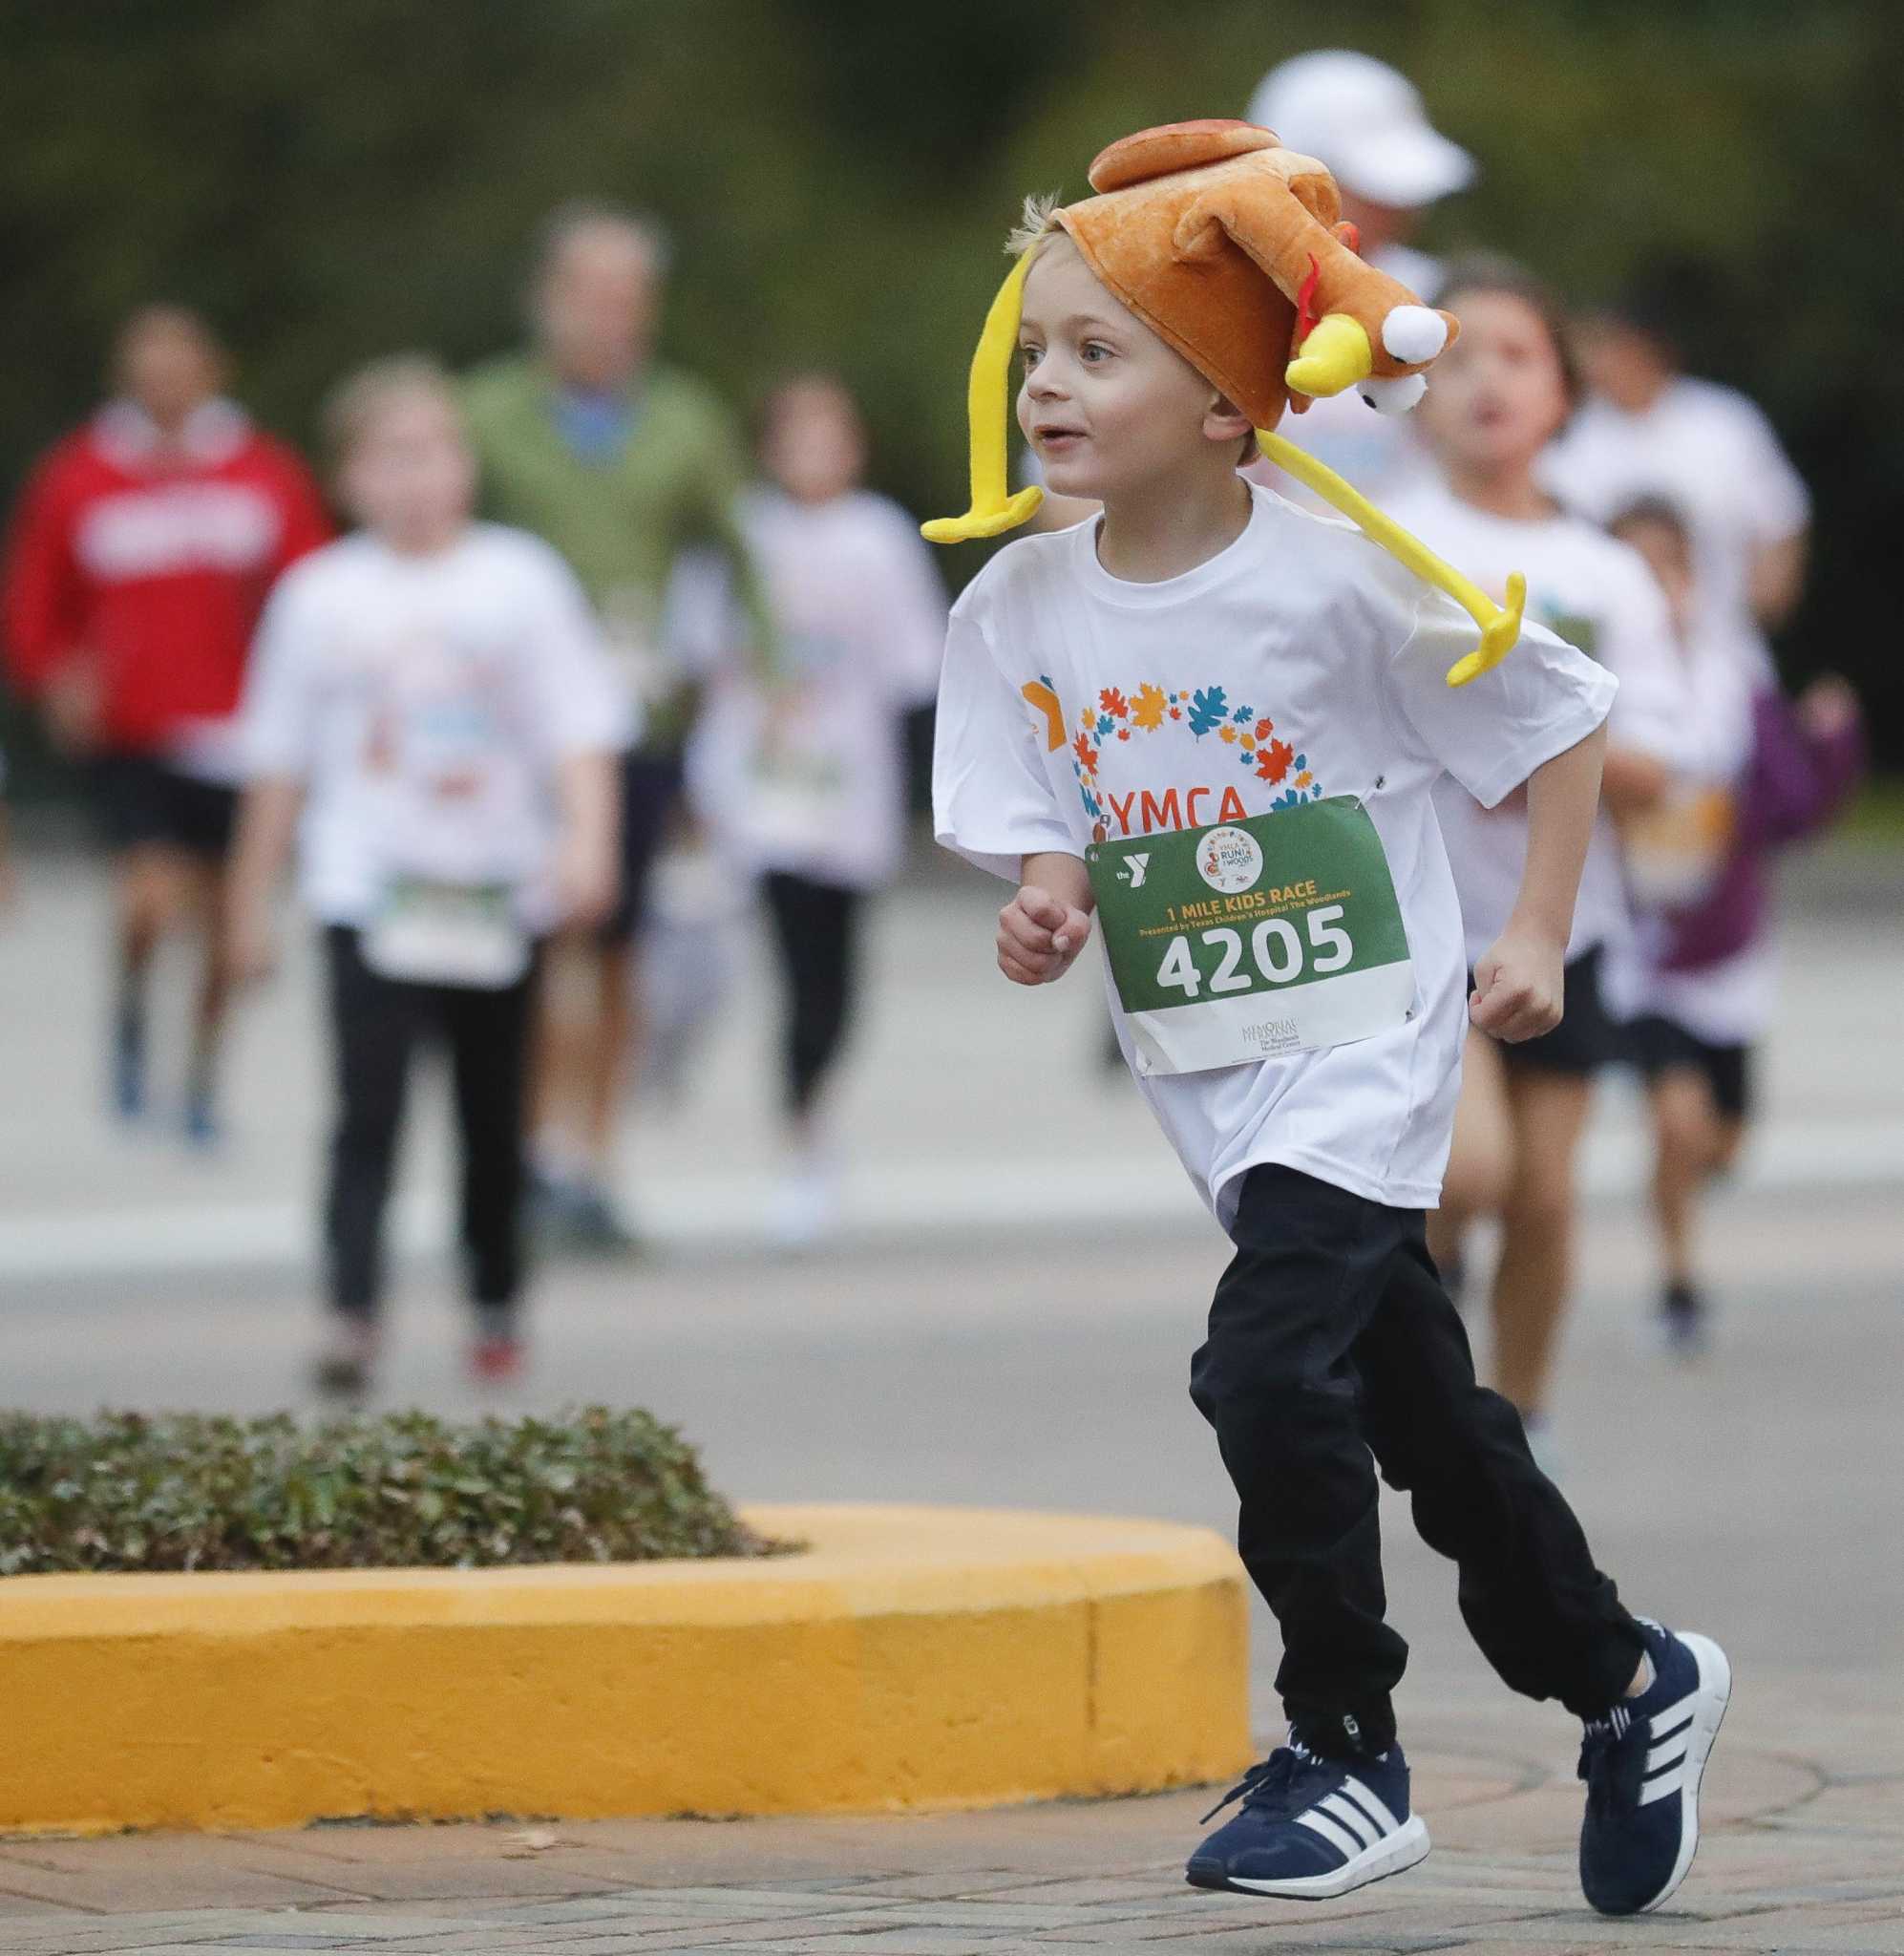 Scenes from The Woodlands Turkey Trot